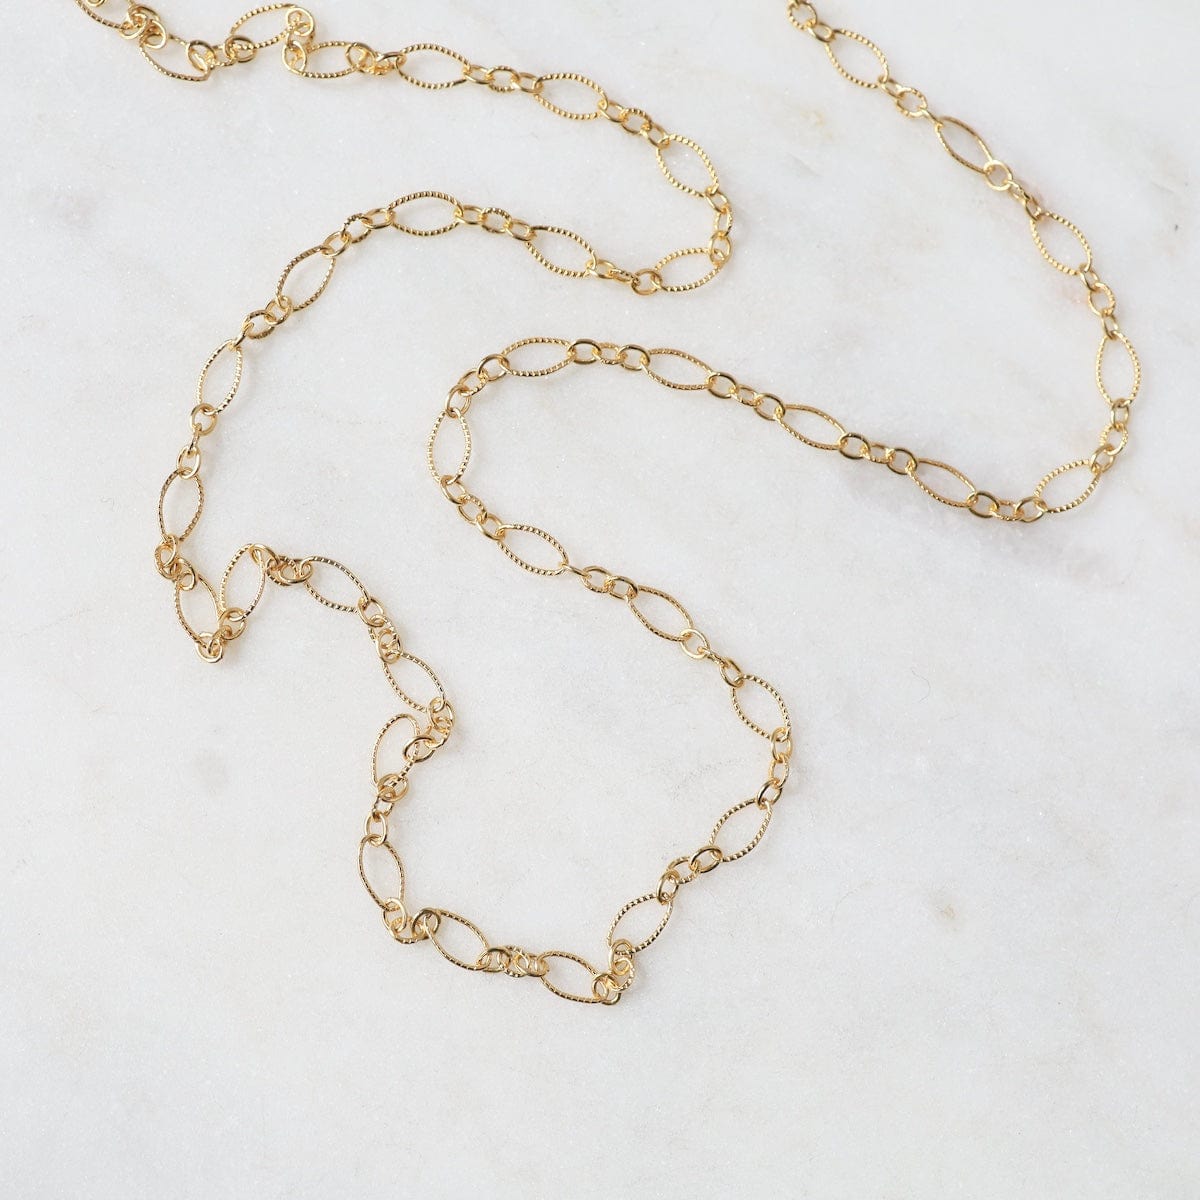 NKL-GF 16" gold Filled Oval Long & Short Chain w/ Lines 4